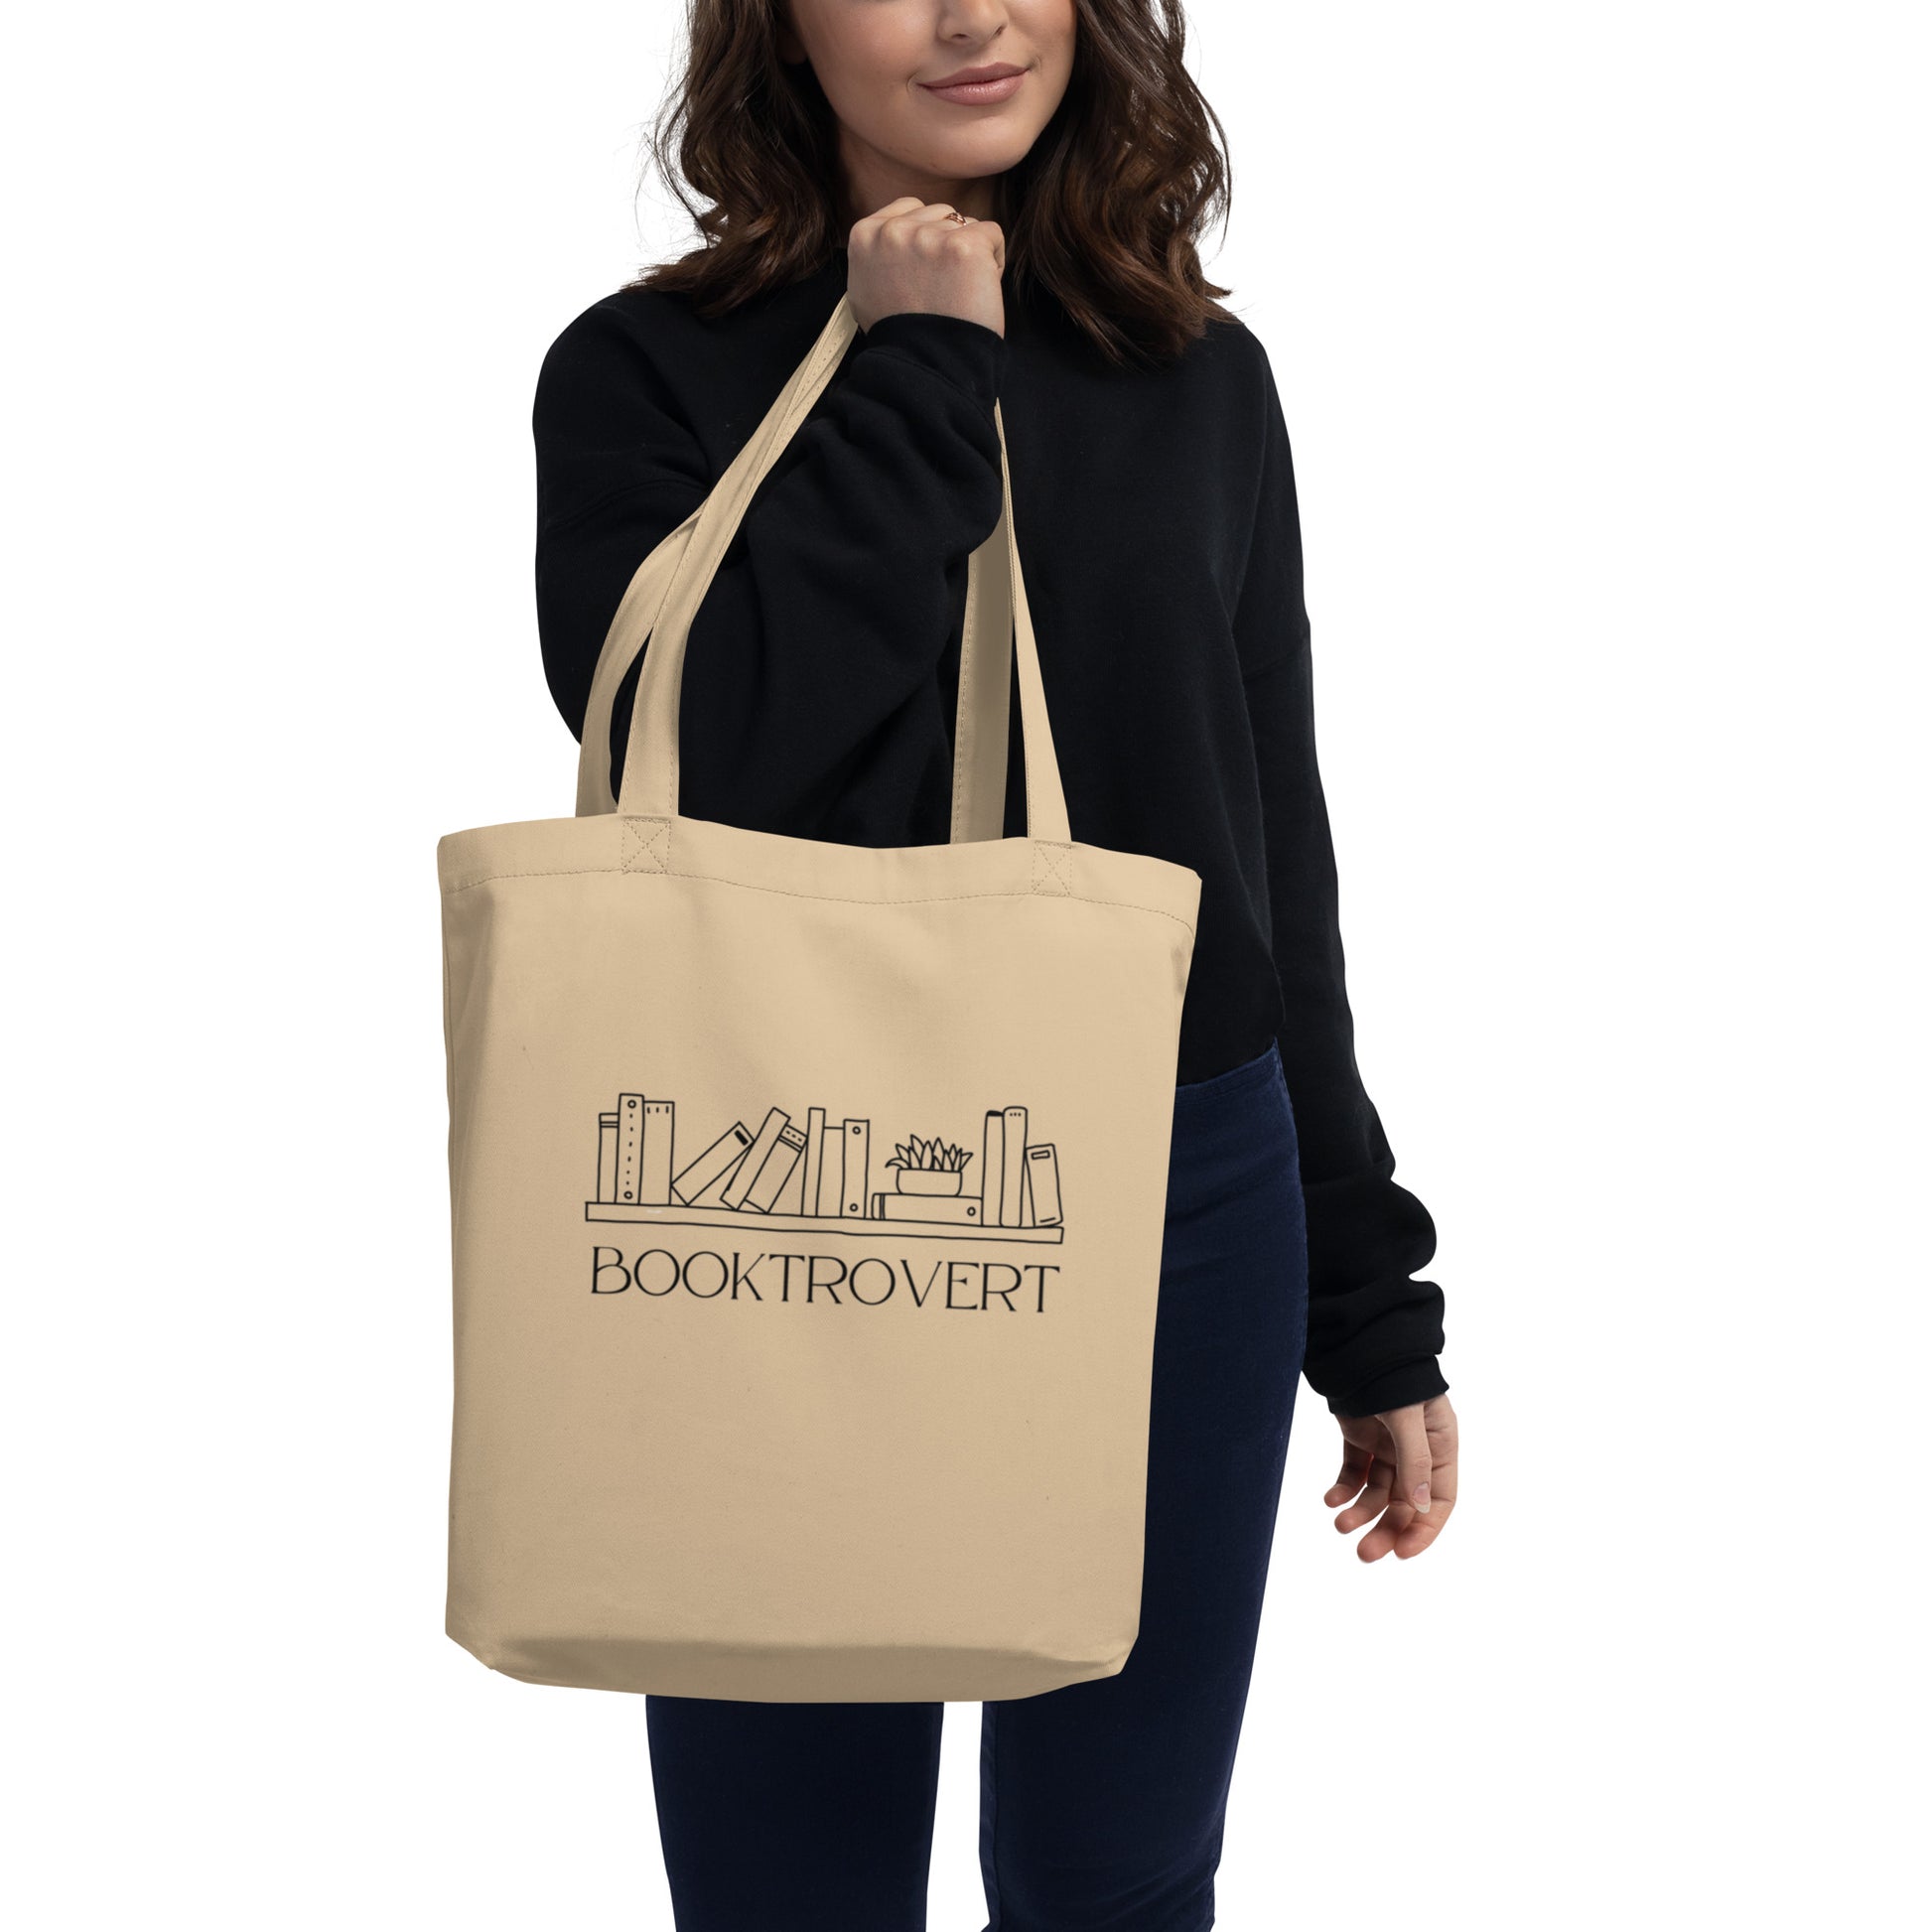 Woman holding Booktrovert Tote Bag